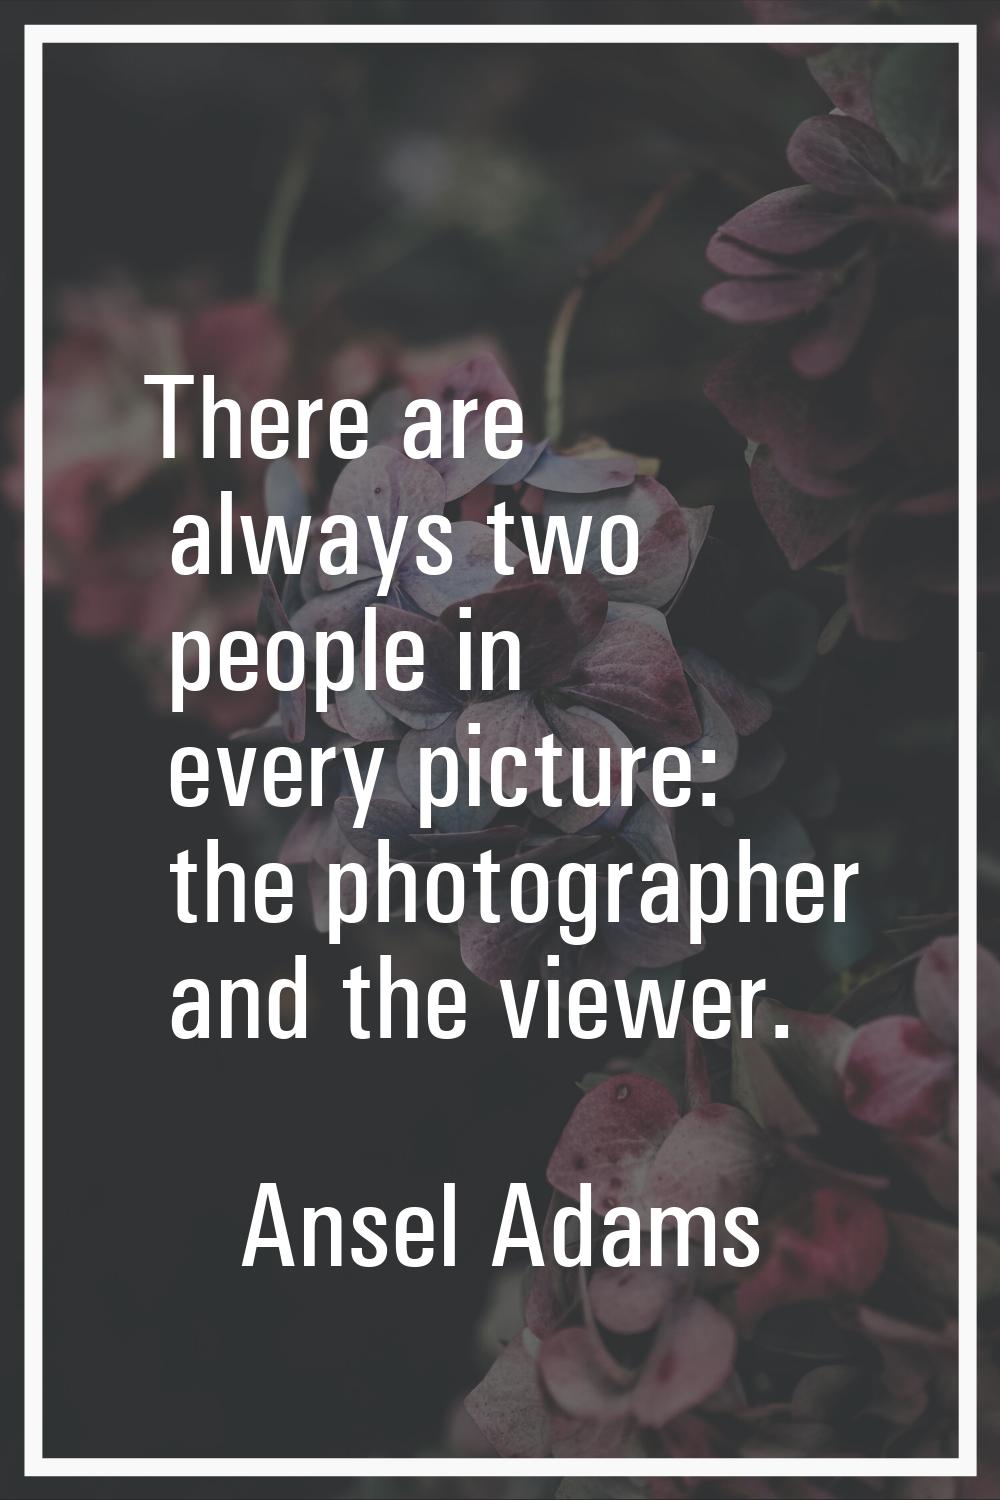 There are always two people in every picture: the photographer and the viewer.